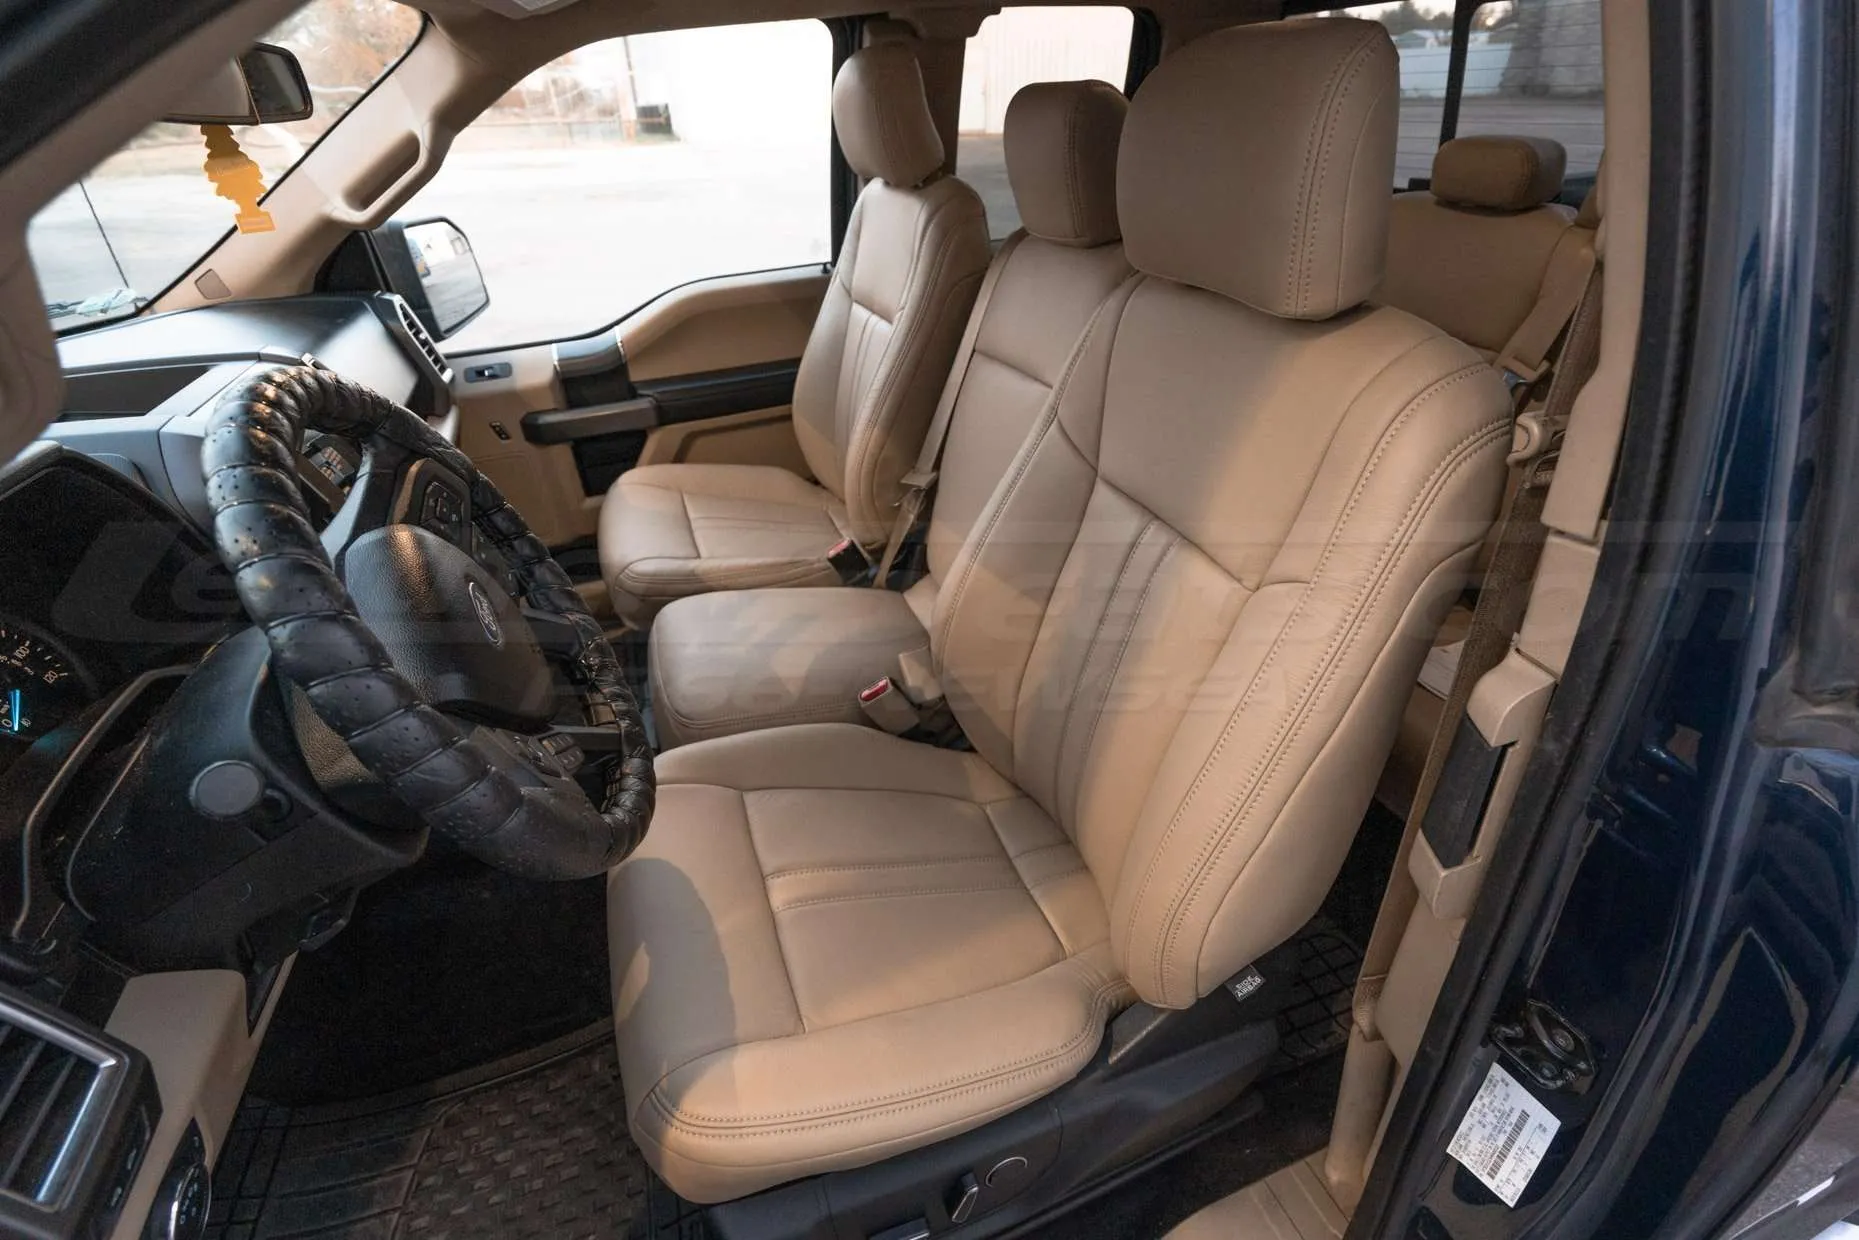 Ford F-150 Leather seats with raised jump seat - Front driver's side